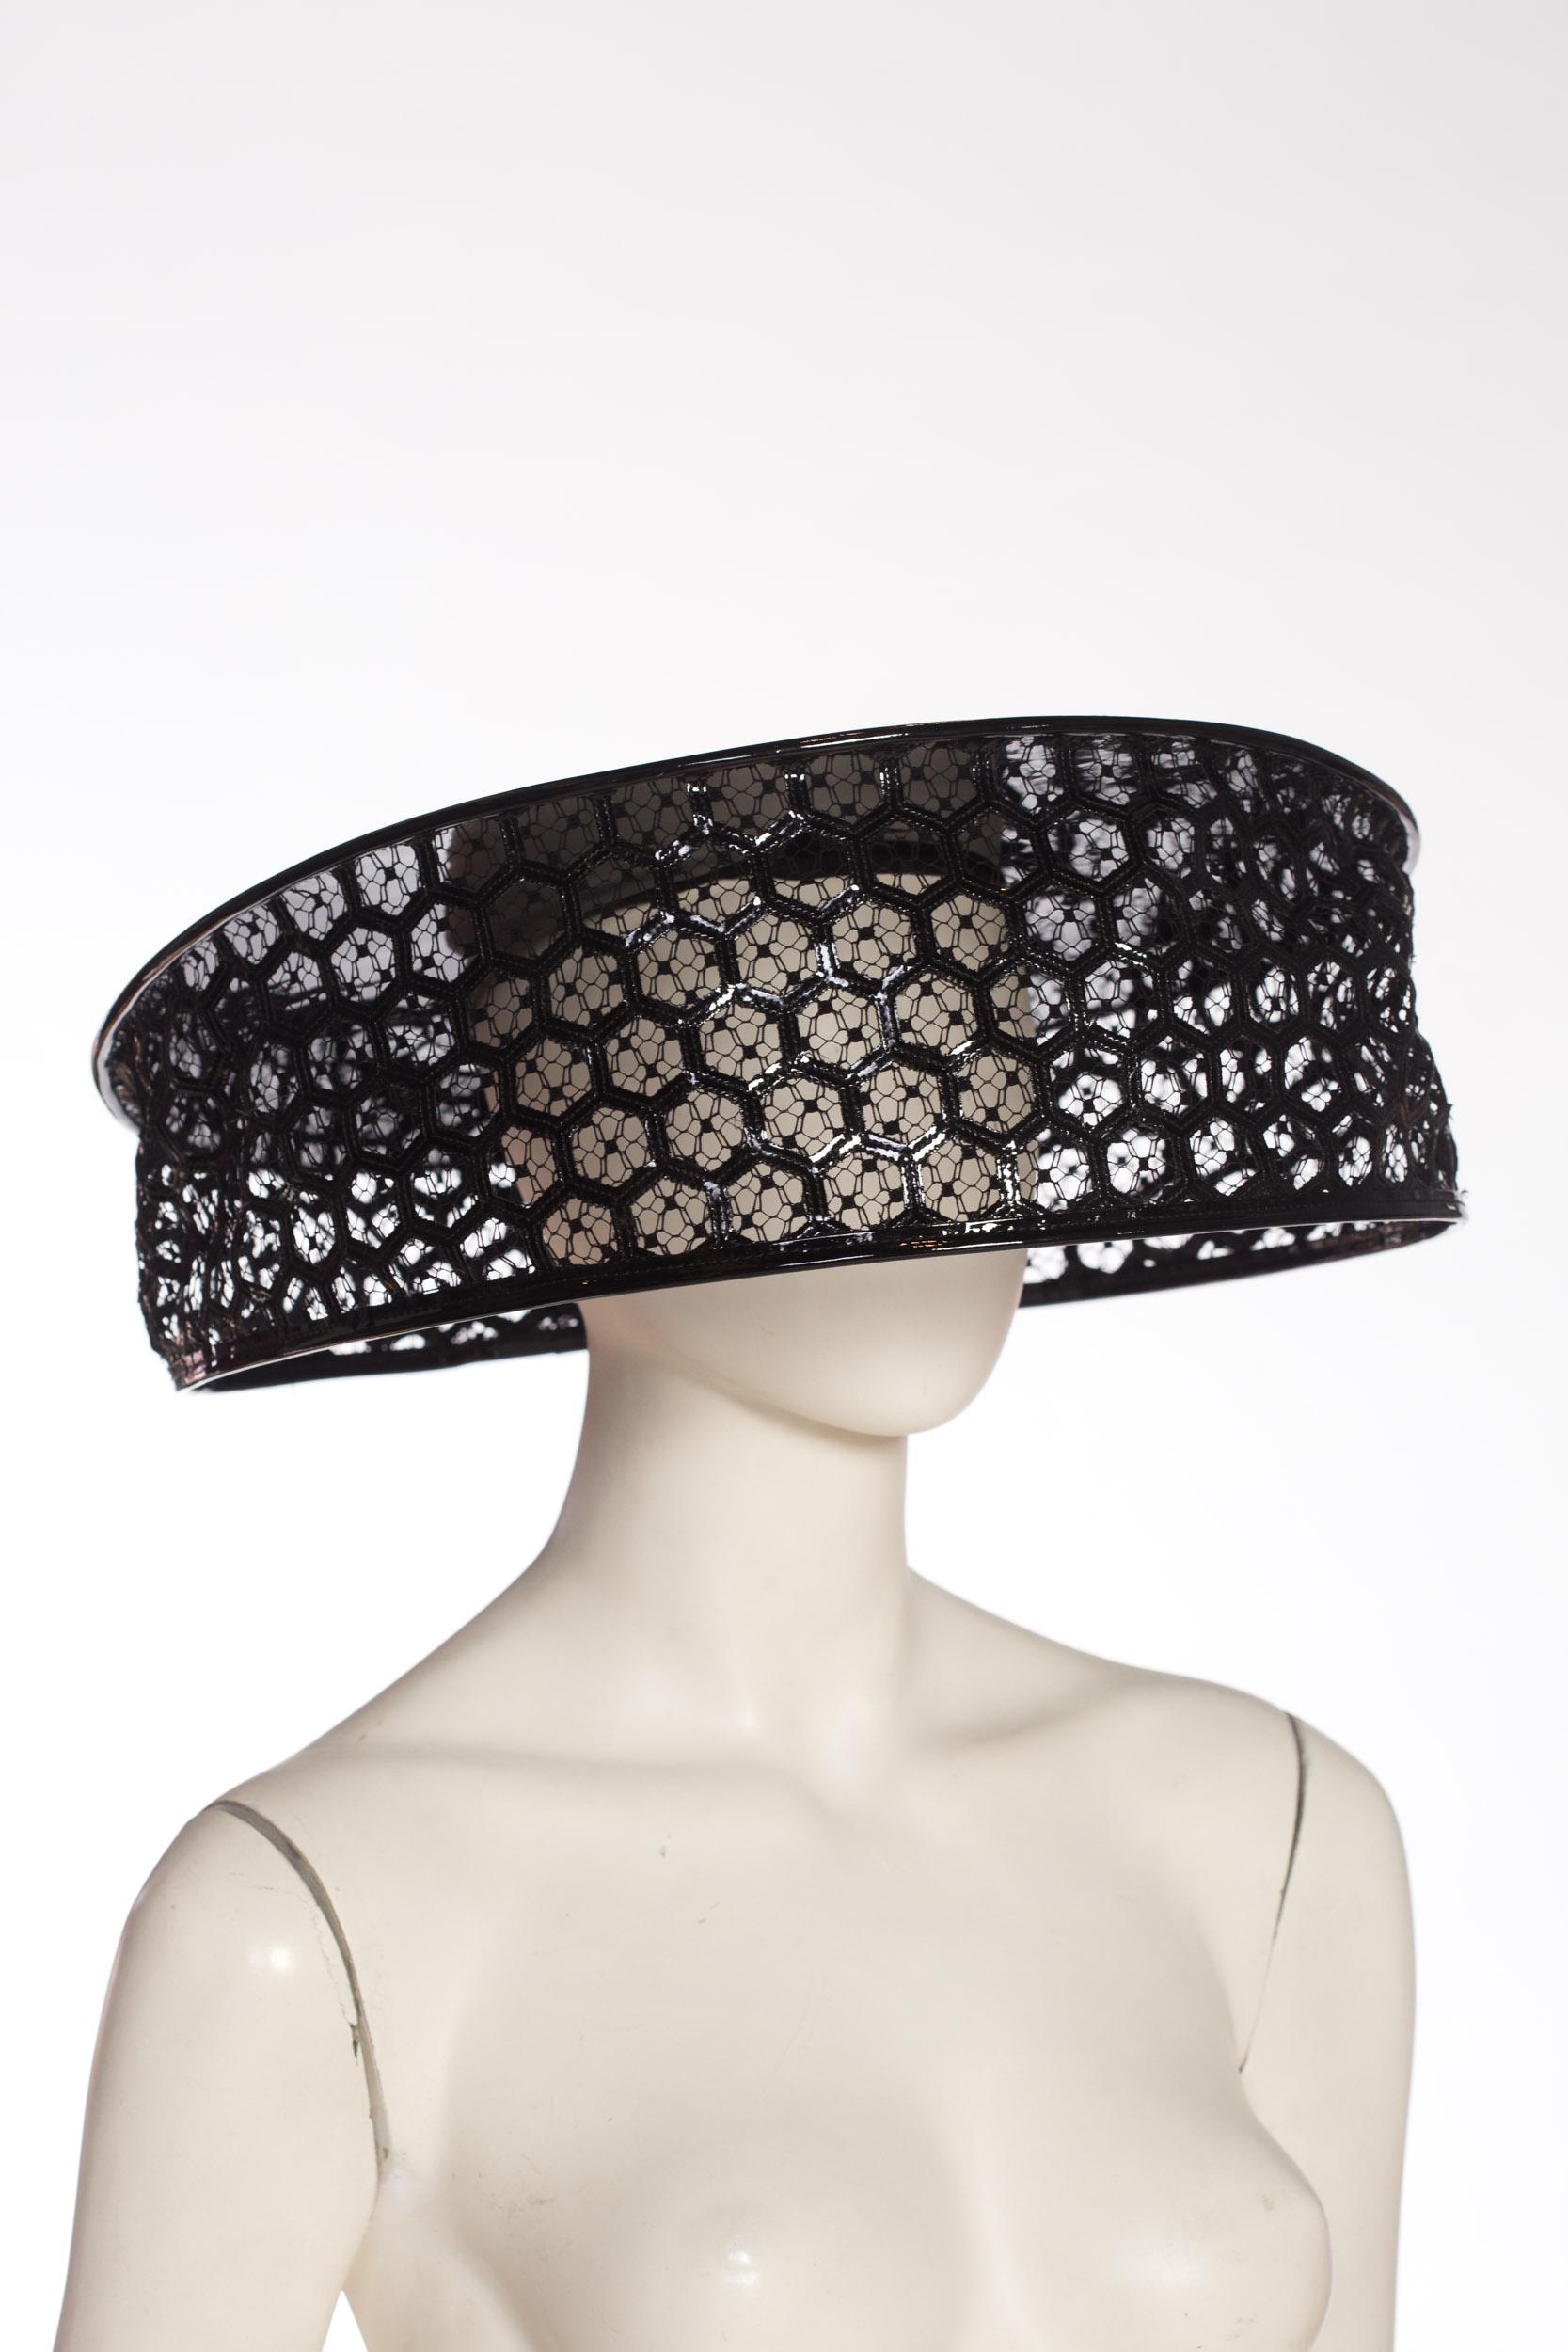 2013 Alexander McQueen Beekeeper Hat Black Patent Leather With 22 Circumference 2